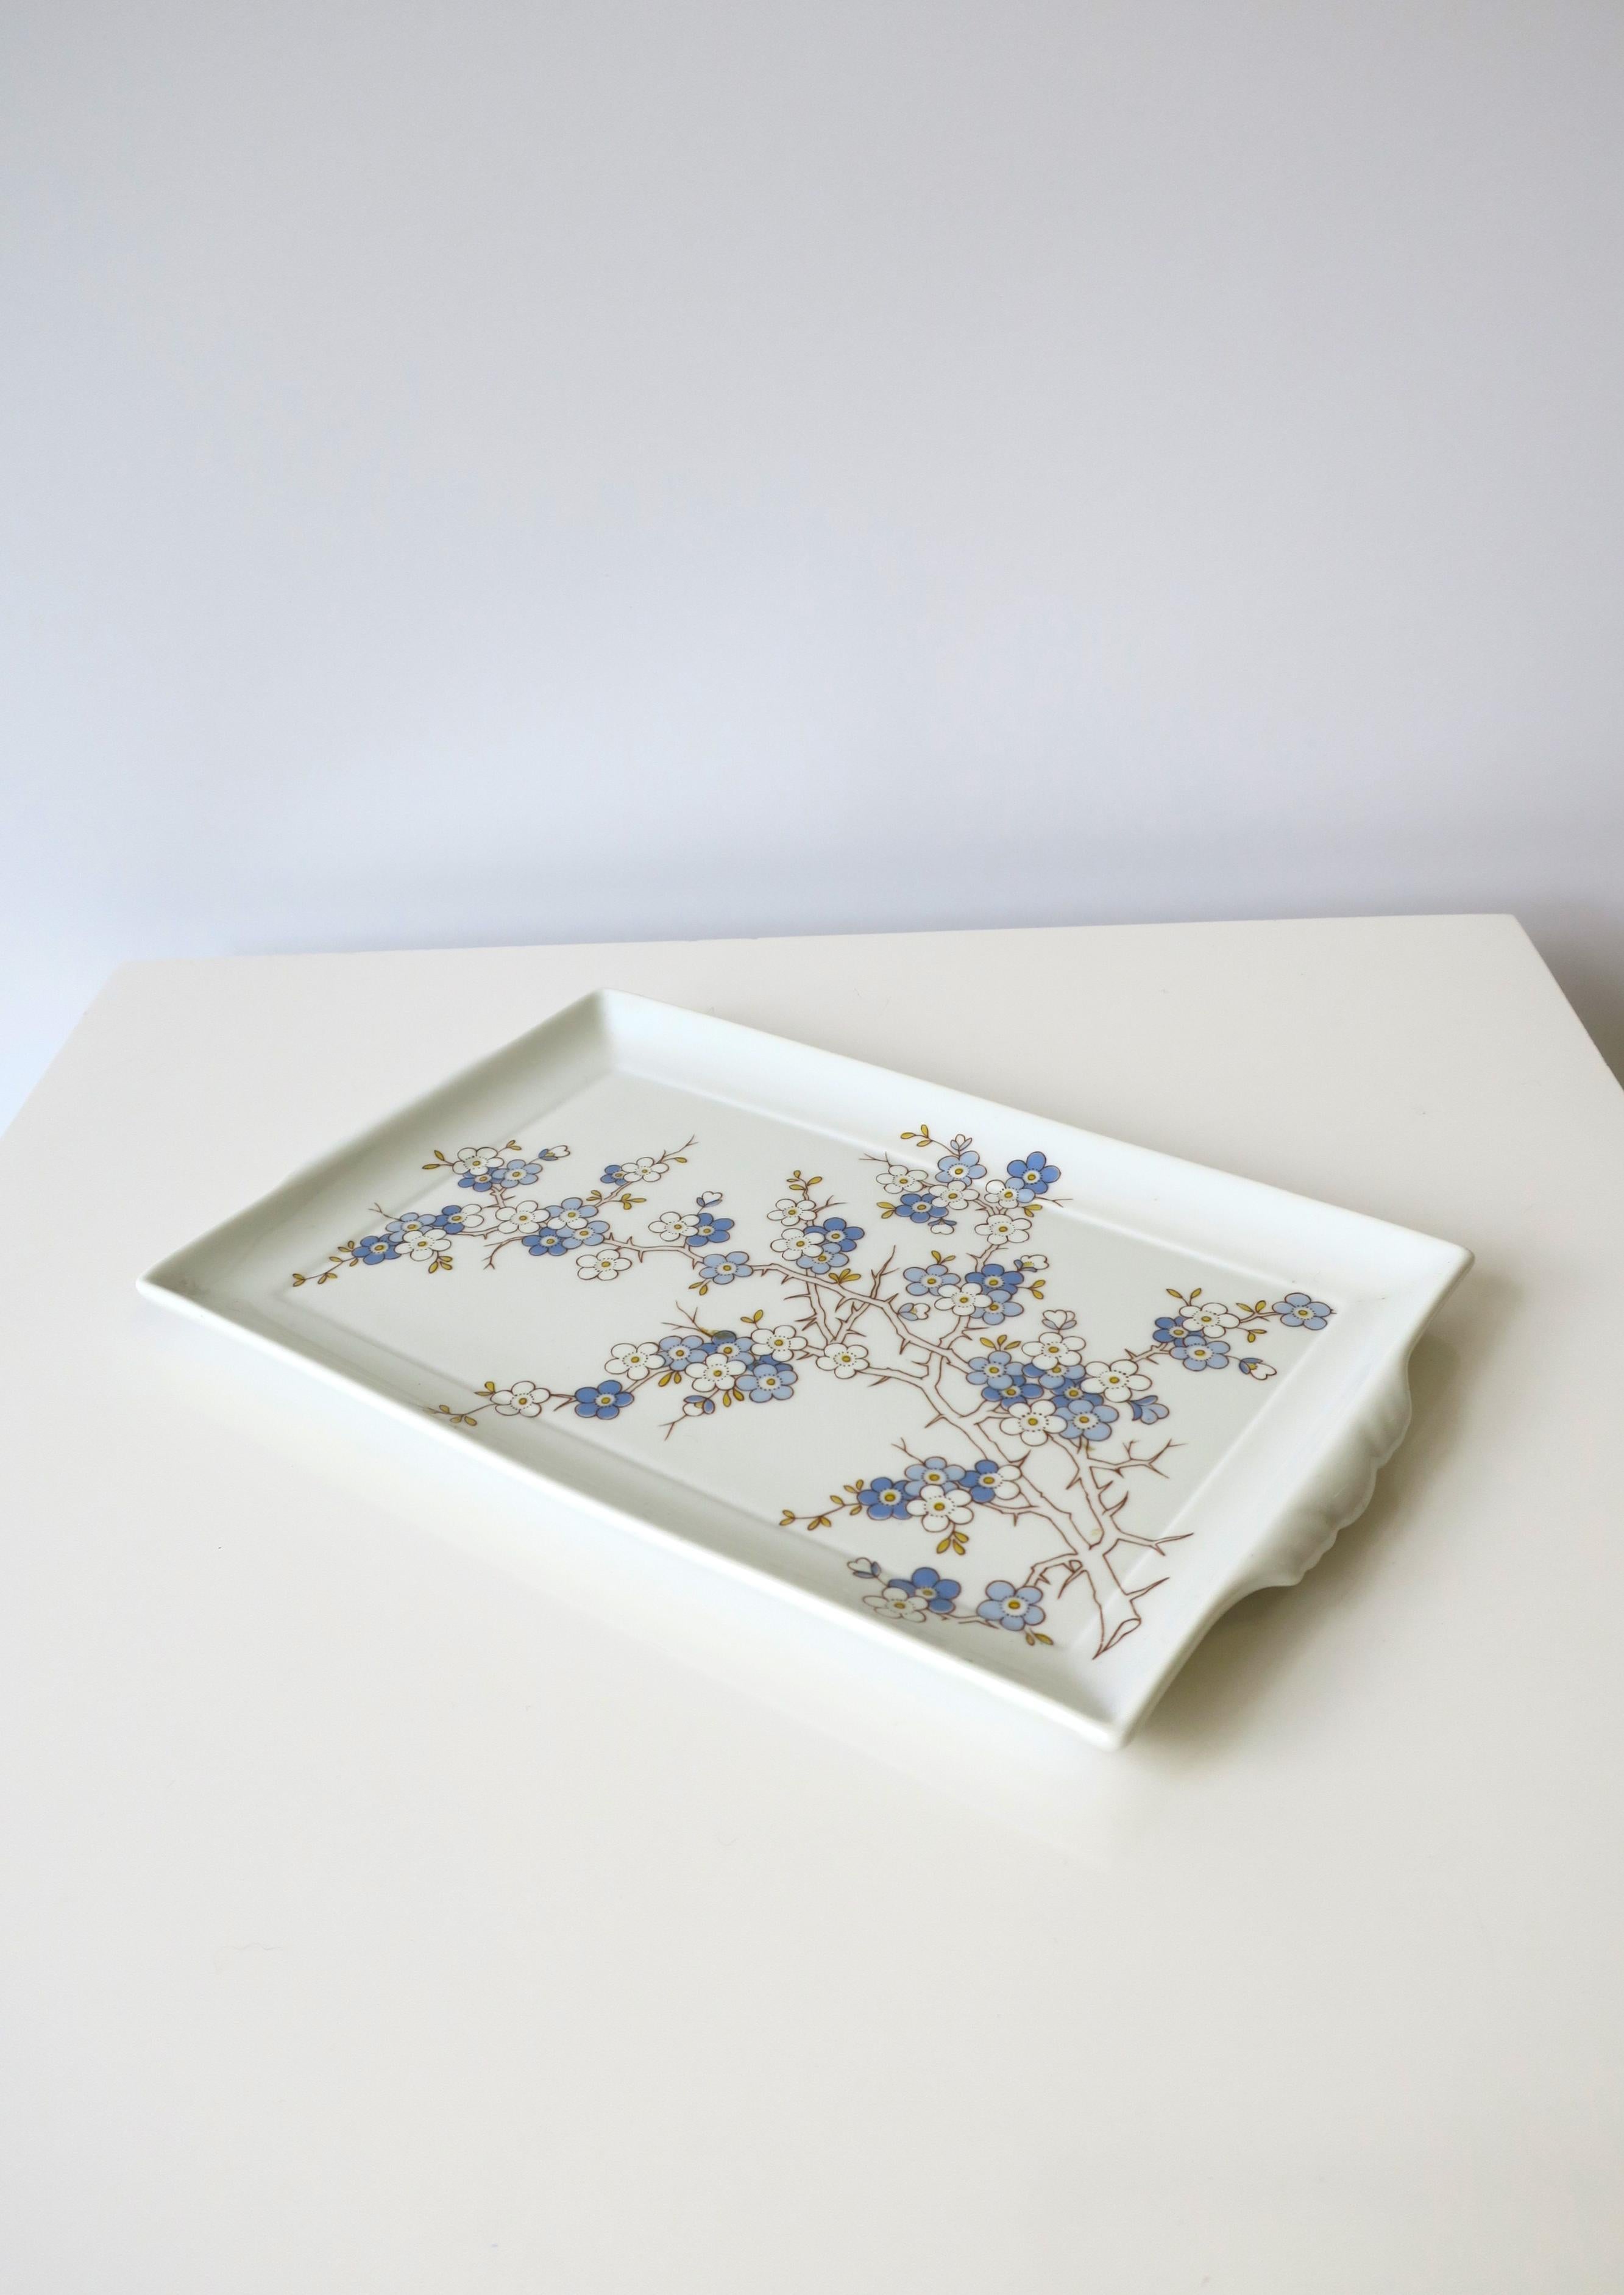 Richard Ginori Italian Porcelain Blue and White Vanity or Serving Tray For Sale 2